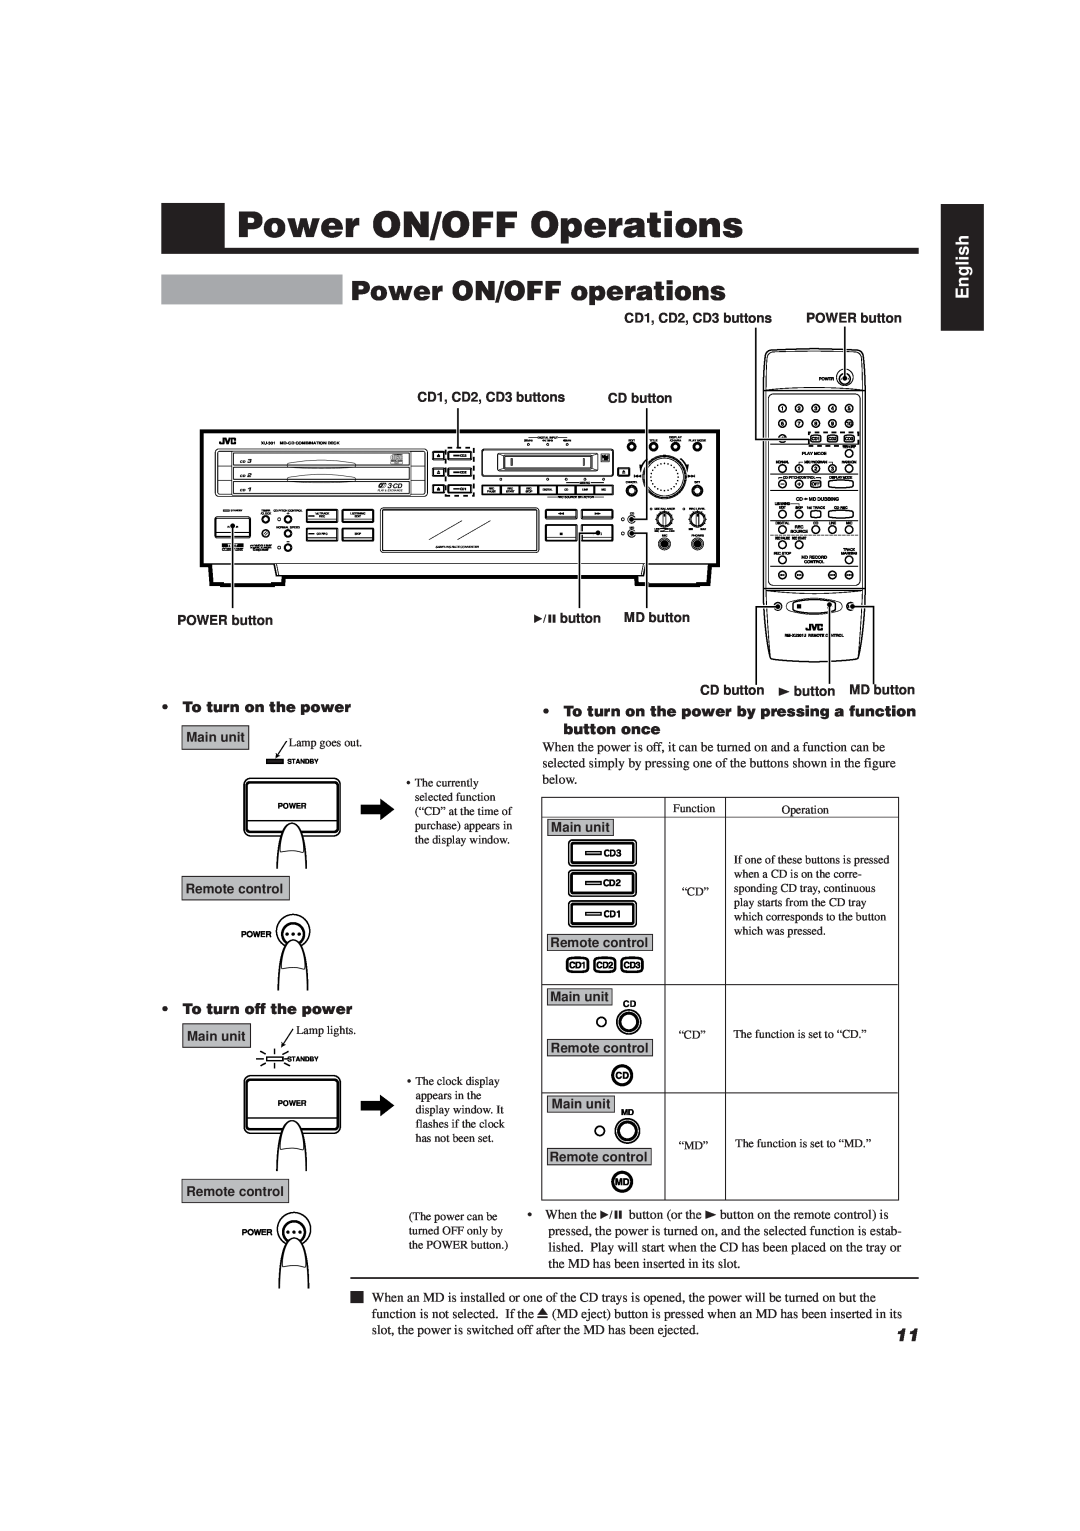 JVC XU-301 manual Power ON/OFF Operations, Power ON/OFF operations, English 